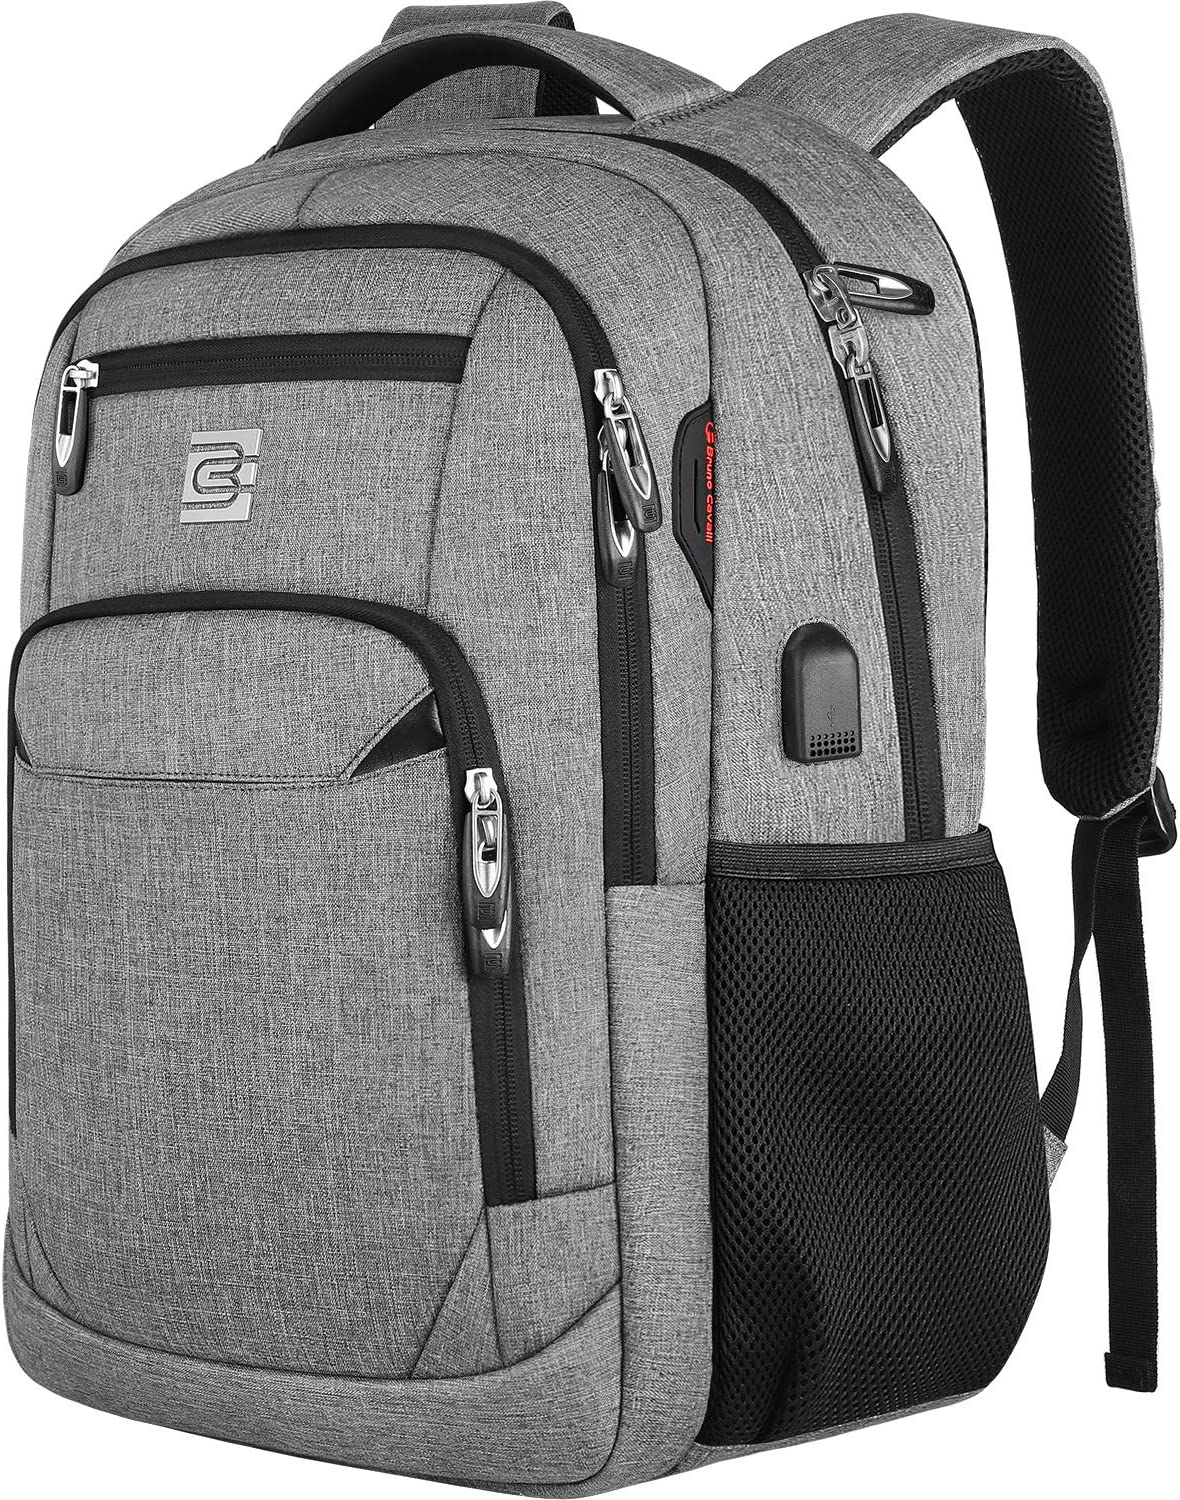 Laptop Backpack,Business Travel Anti Theft Slim [...]